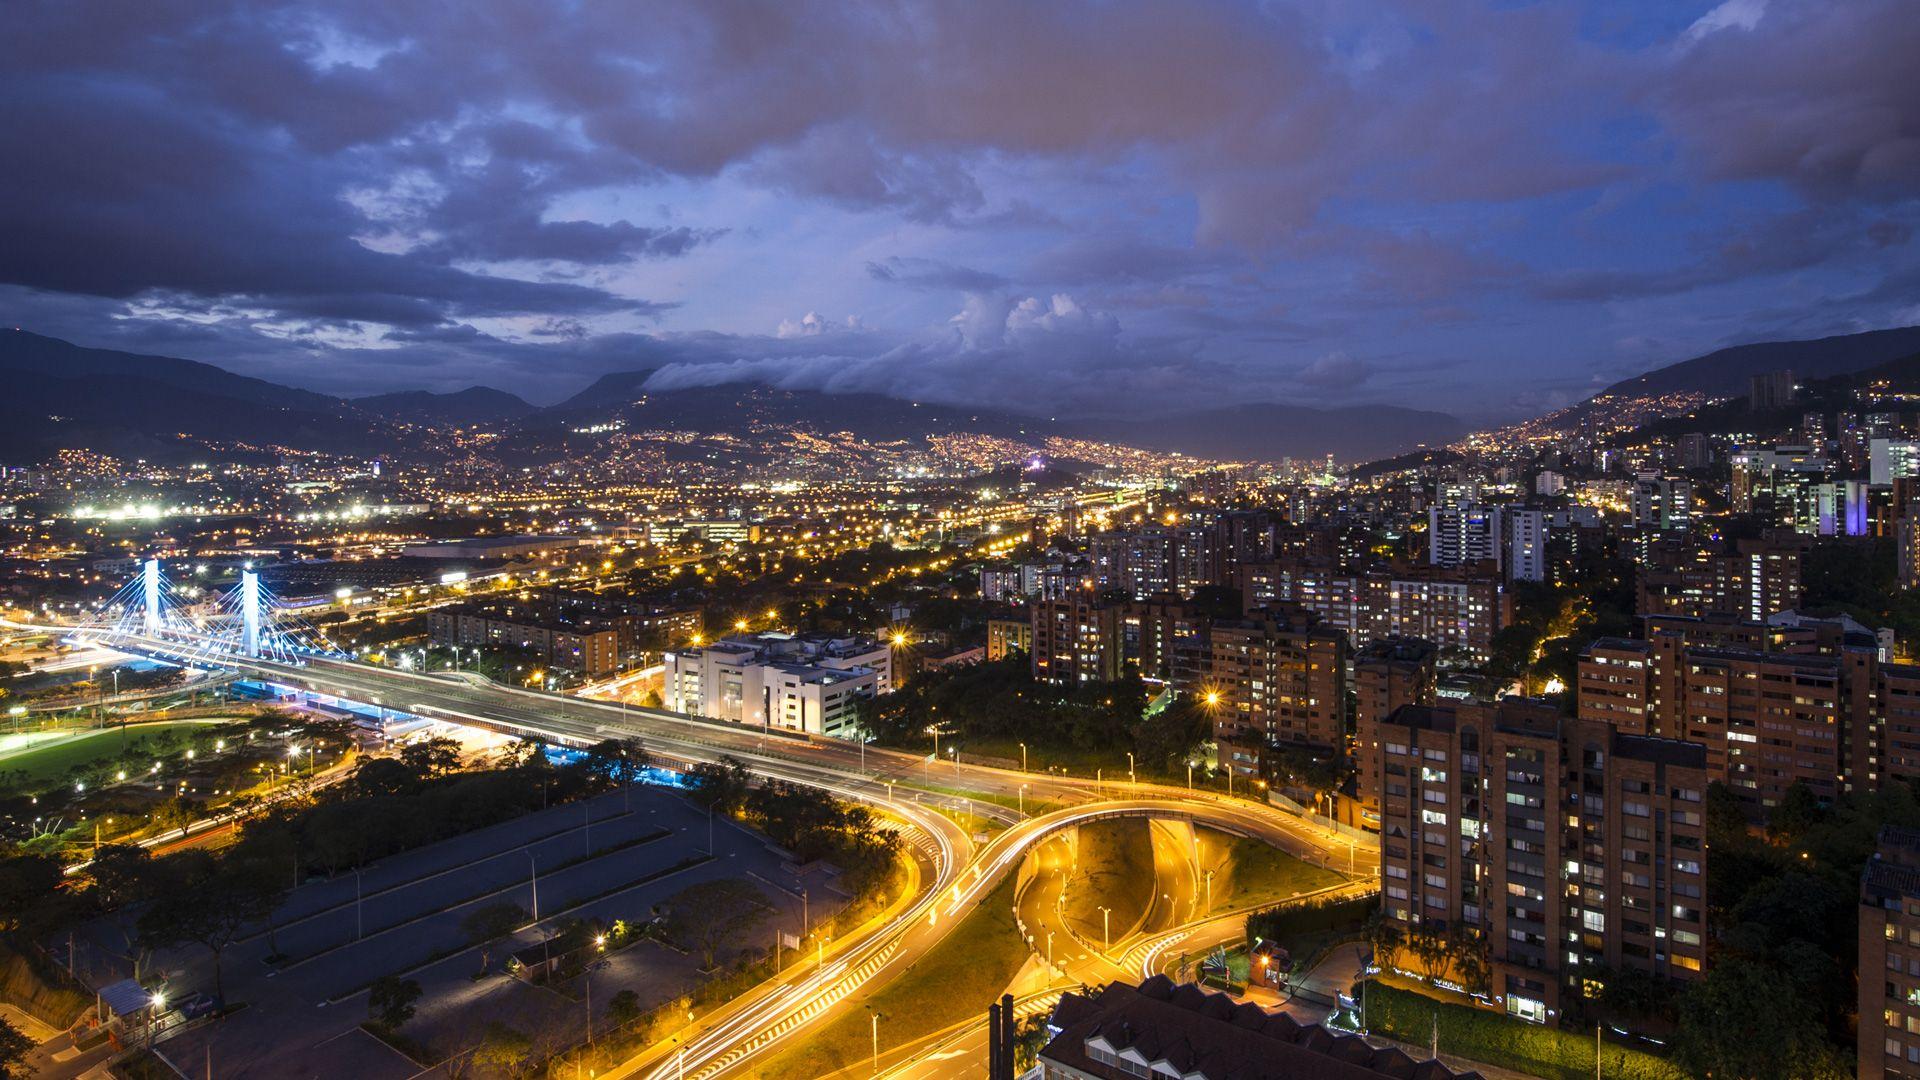 Medellin Colombia Wallpaper Related Keywords & Suggestions